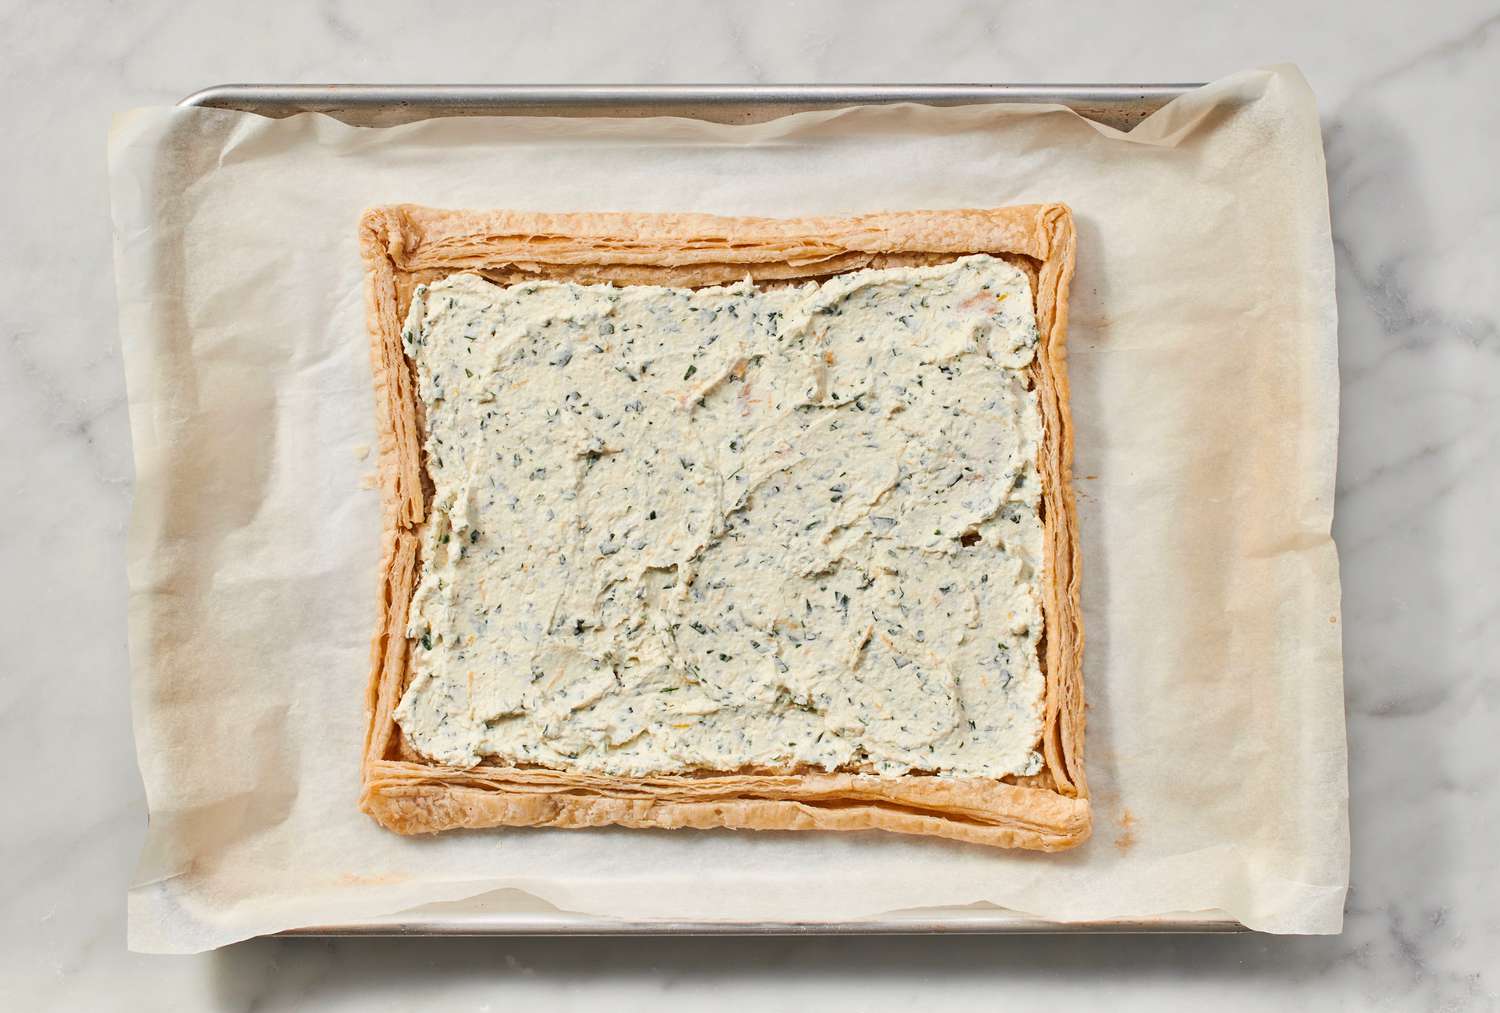 A partially baked puff pastry crust covered in the seasoned cream cheese mixture